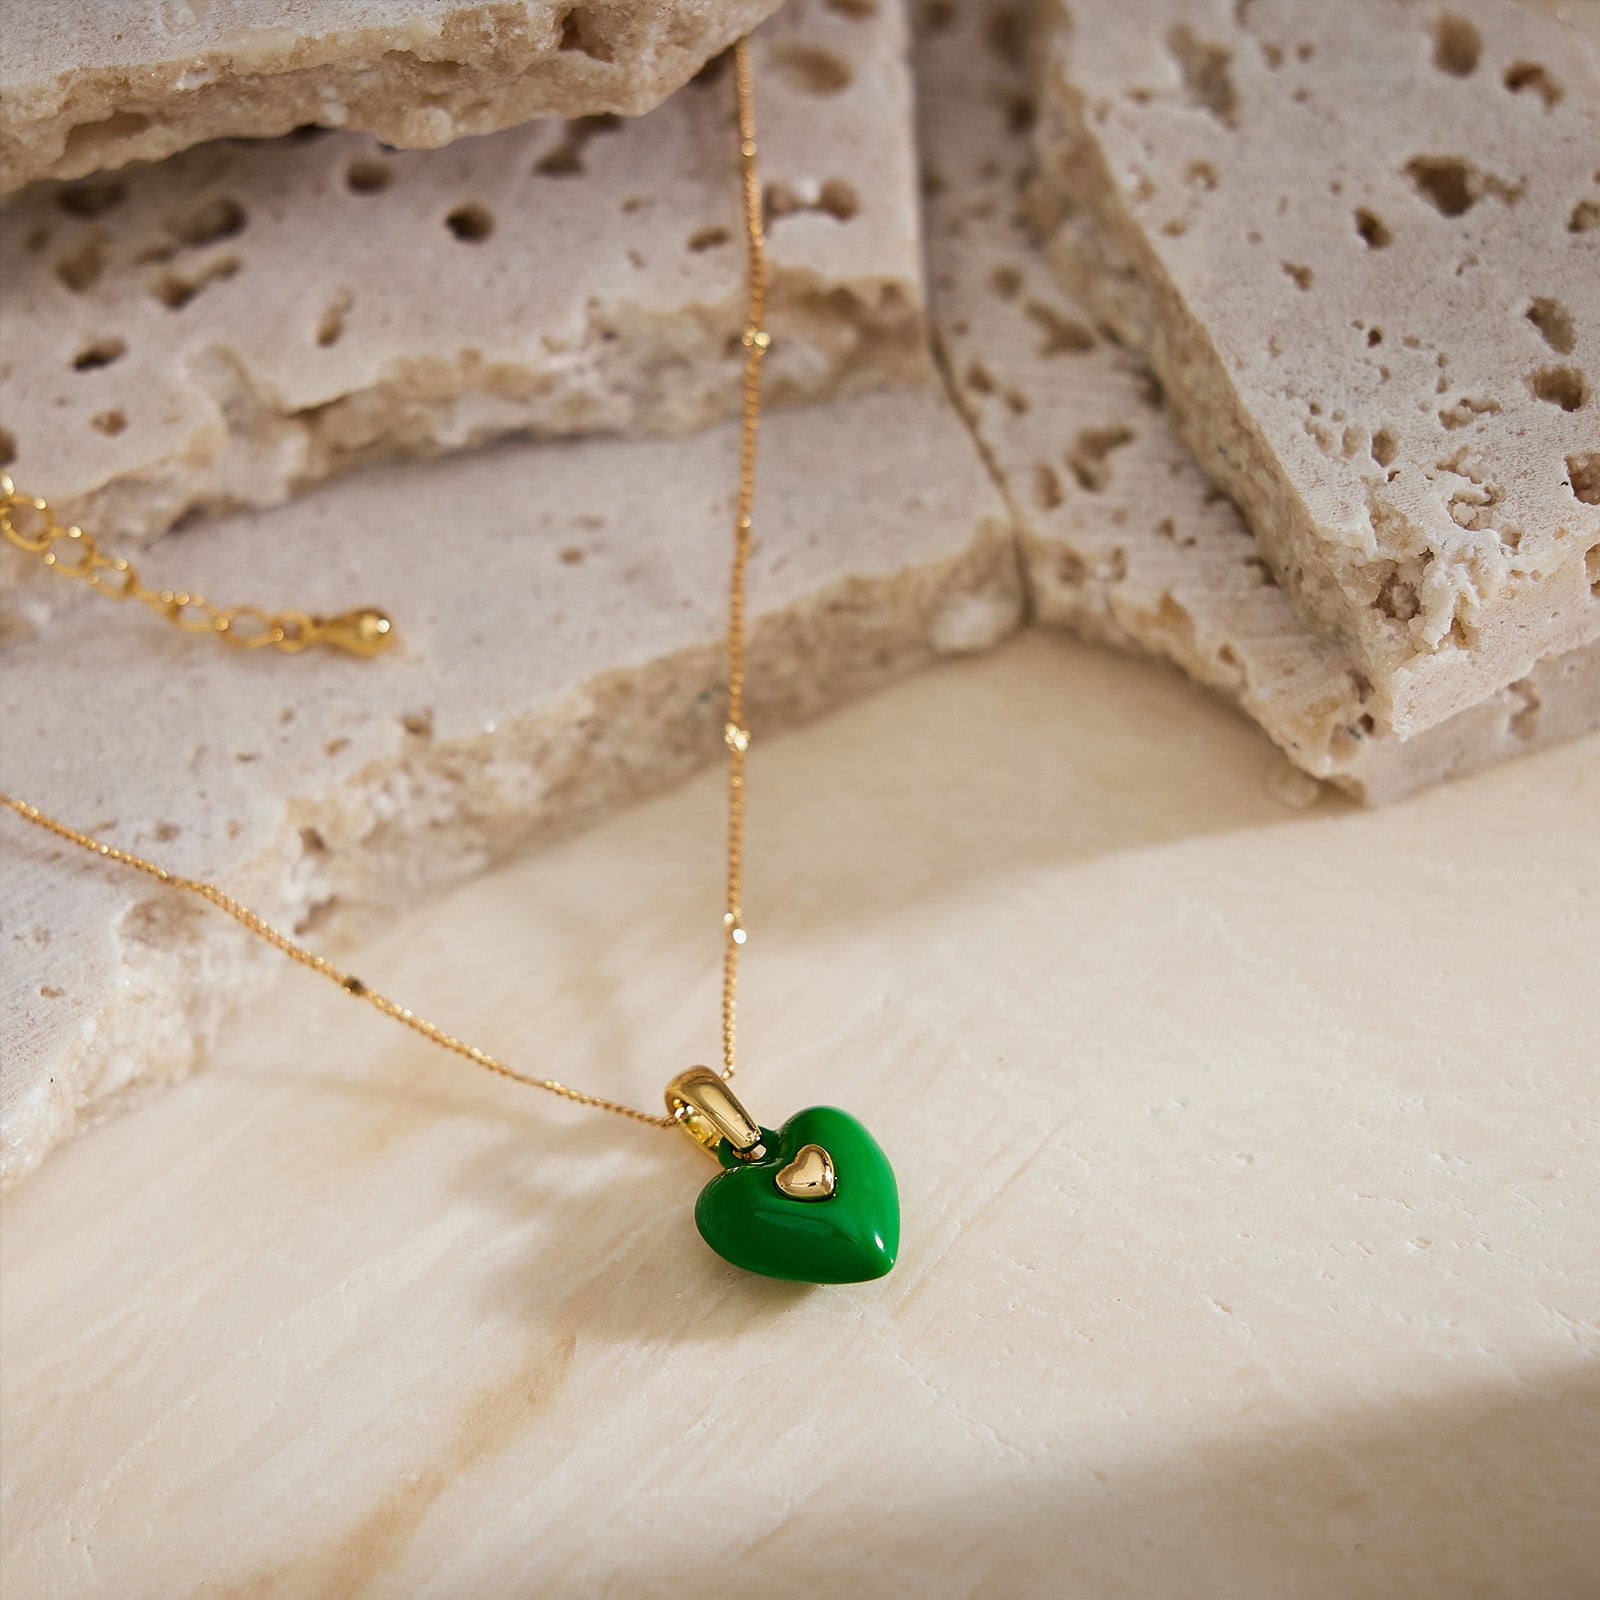 Green Grace Unveiled: Onyx Heart Pendant Necklace, unveiling the grace of green, this necklace features a mesmerizing heart-shaped onyx pendant, creating a captivating and versatile accessory